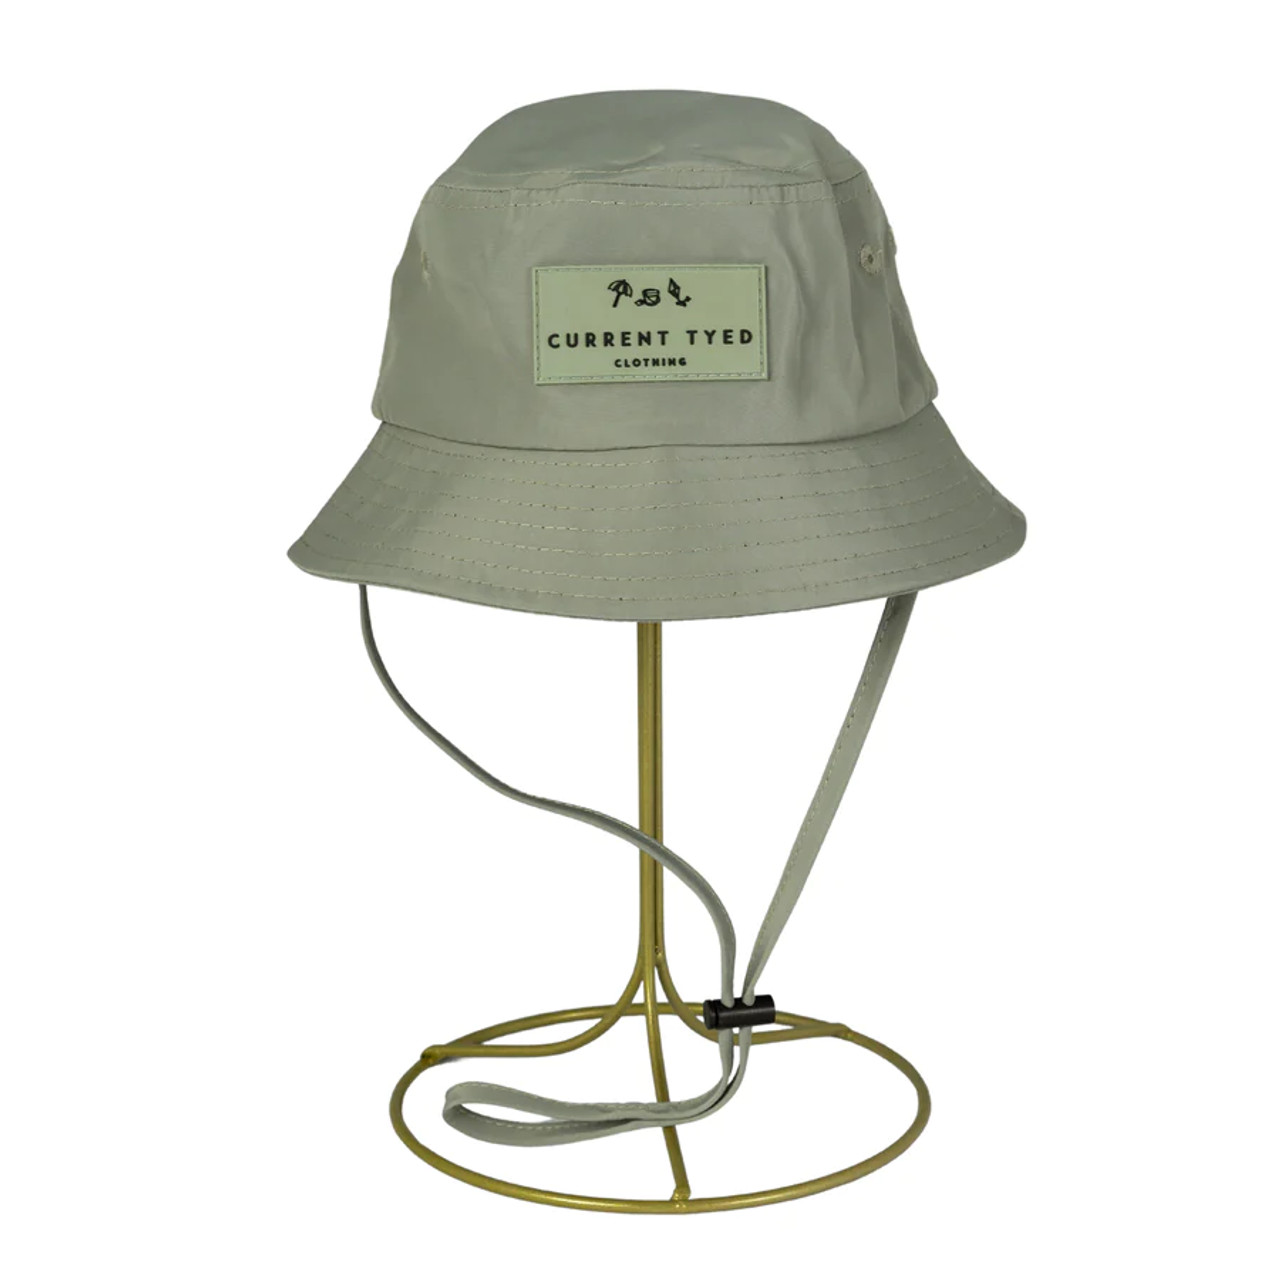 Current Tyed Clothing Waterproof Bucket Hat - Sage Green